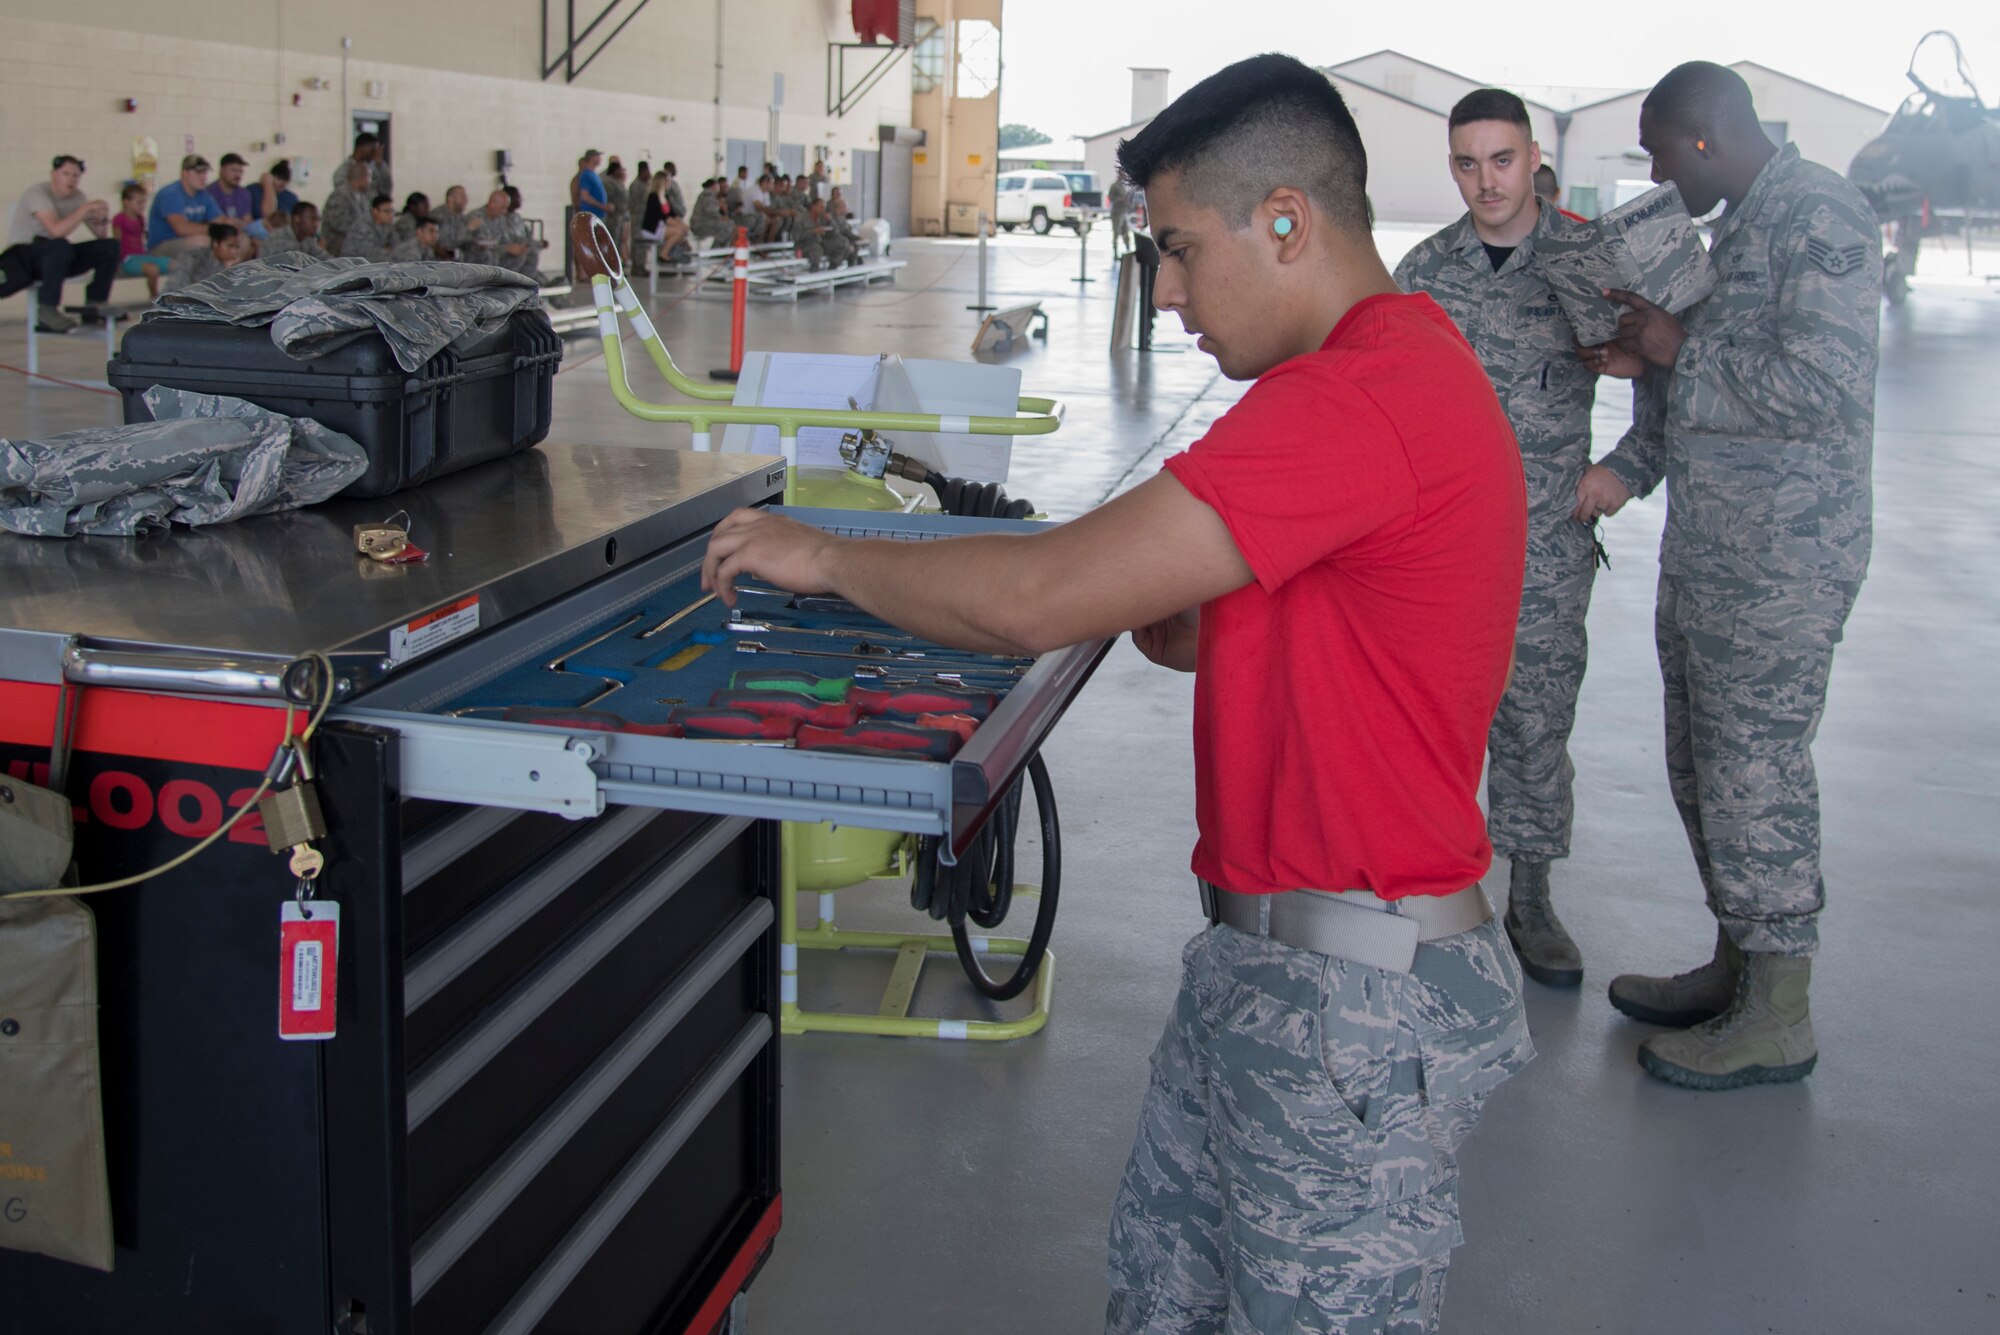 Airman 1st Class Amado Almazan, 75th Aircraft Maintenance Unit weapons load crew member, accounts for equipment during a toll box inspection as part of a weapons load competition, July 14, 2017, at Moody Air Force Base, Ga. Every quarter members of the 74th and 75th AMU competes in the quarterly competition that tests knowledge, dress and appearance, and speed of loading a GBU-12 joint direct attack munition and AIM-9 Sidewinder. (U.S. Air Force photo by Staff Sgt. Eric Summers Jr.)